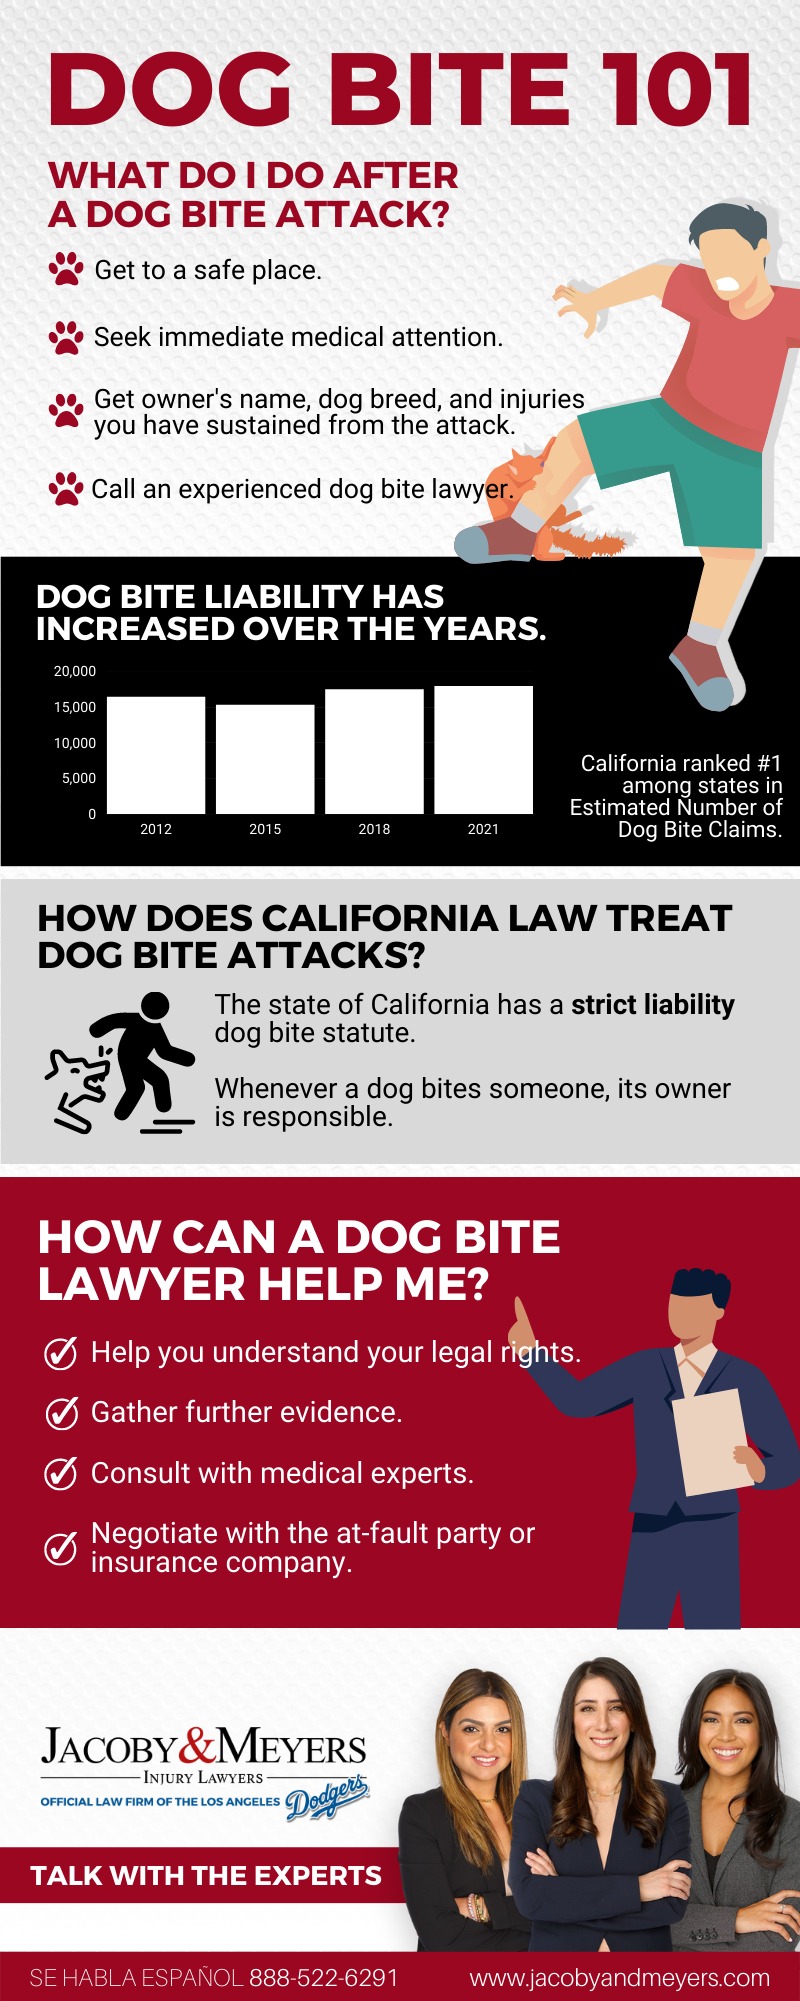 How can a dog bite lawyer help me infographic